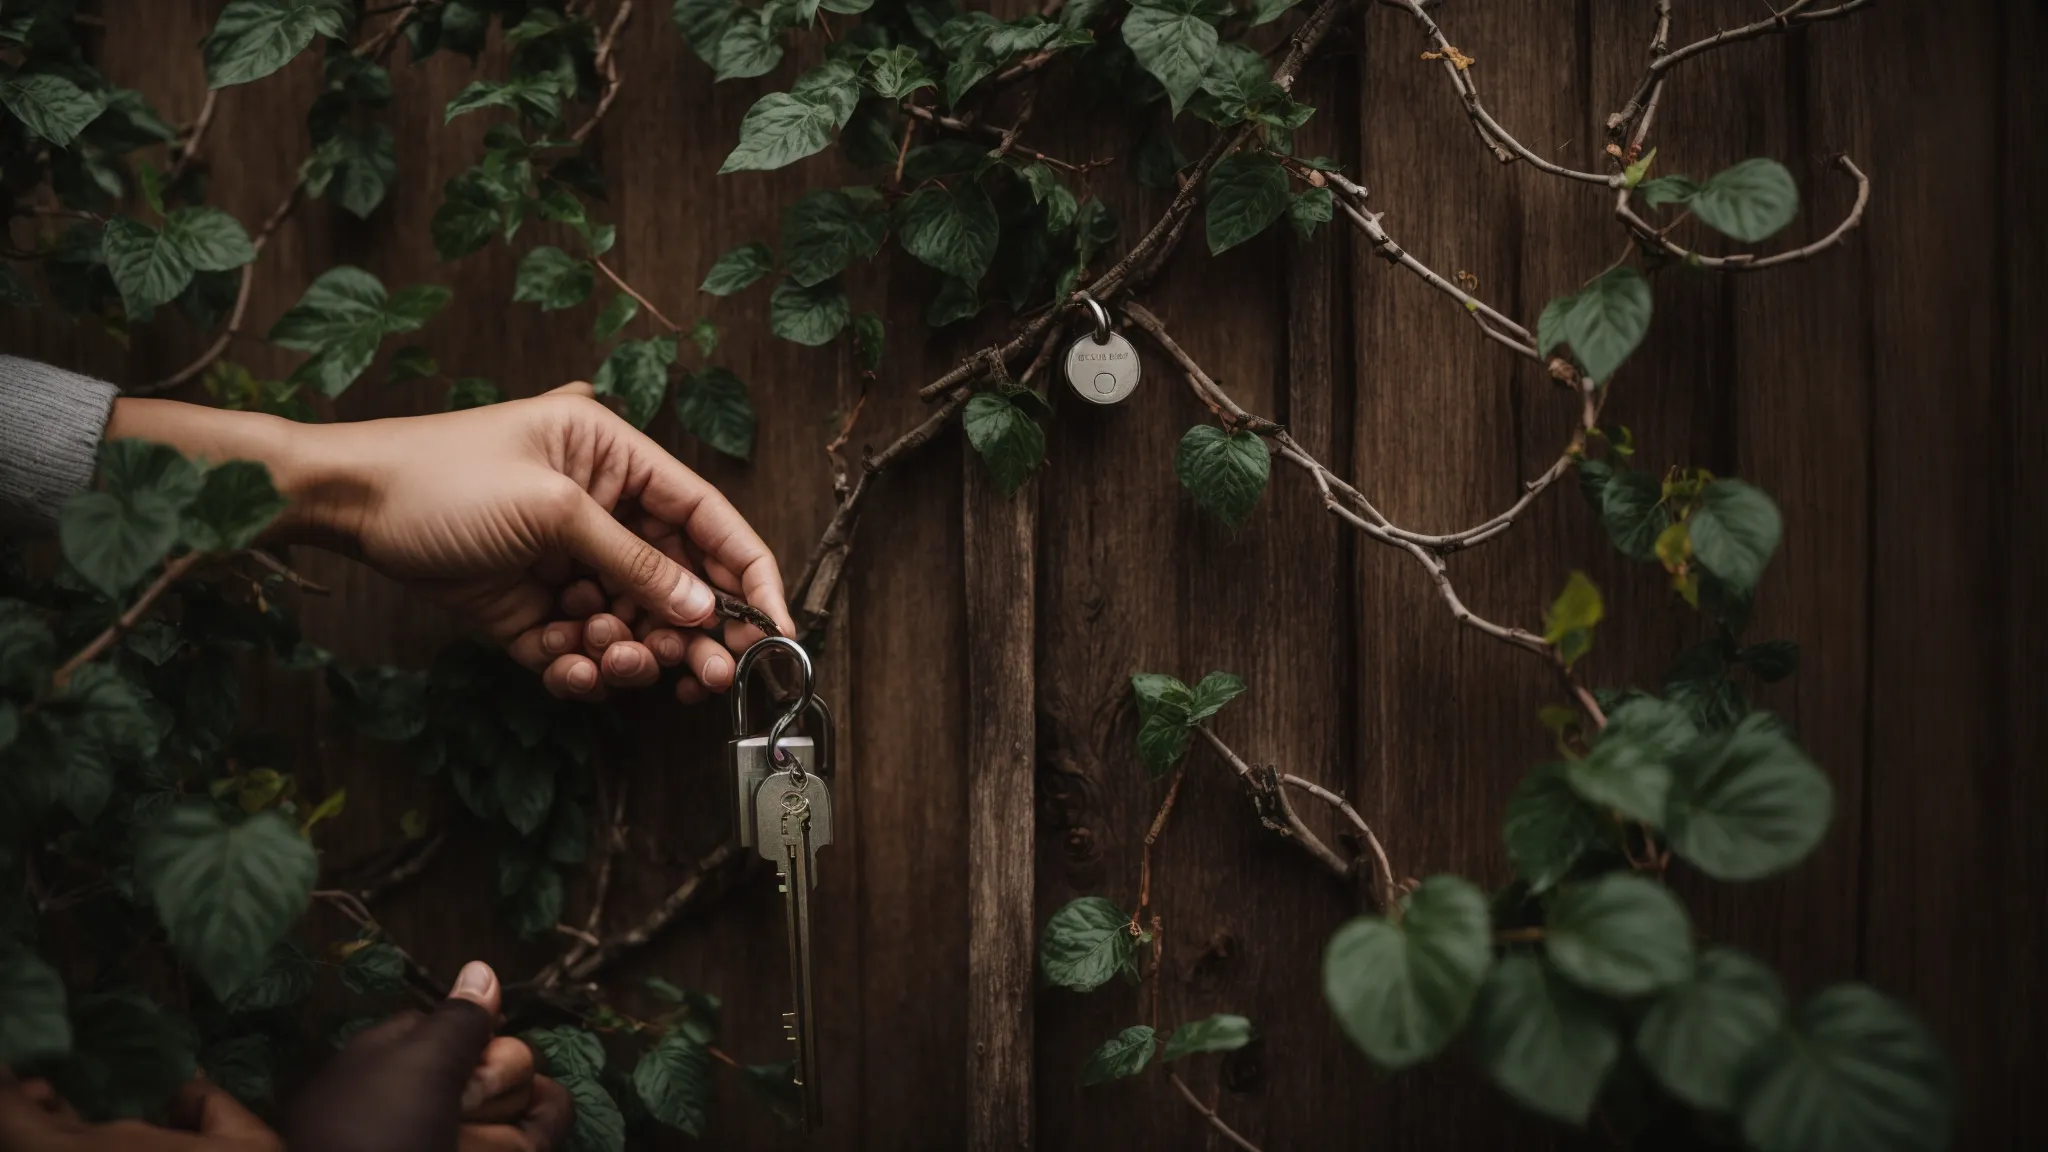 a person places a key into a lock surrounded by a network of interconnected vines and leaves against a rustic wooden background.